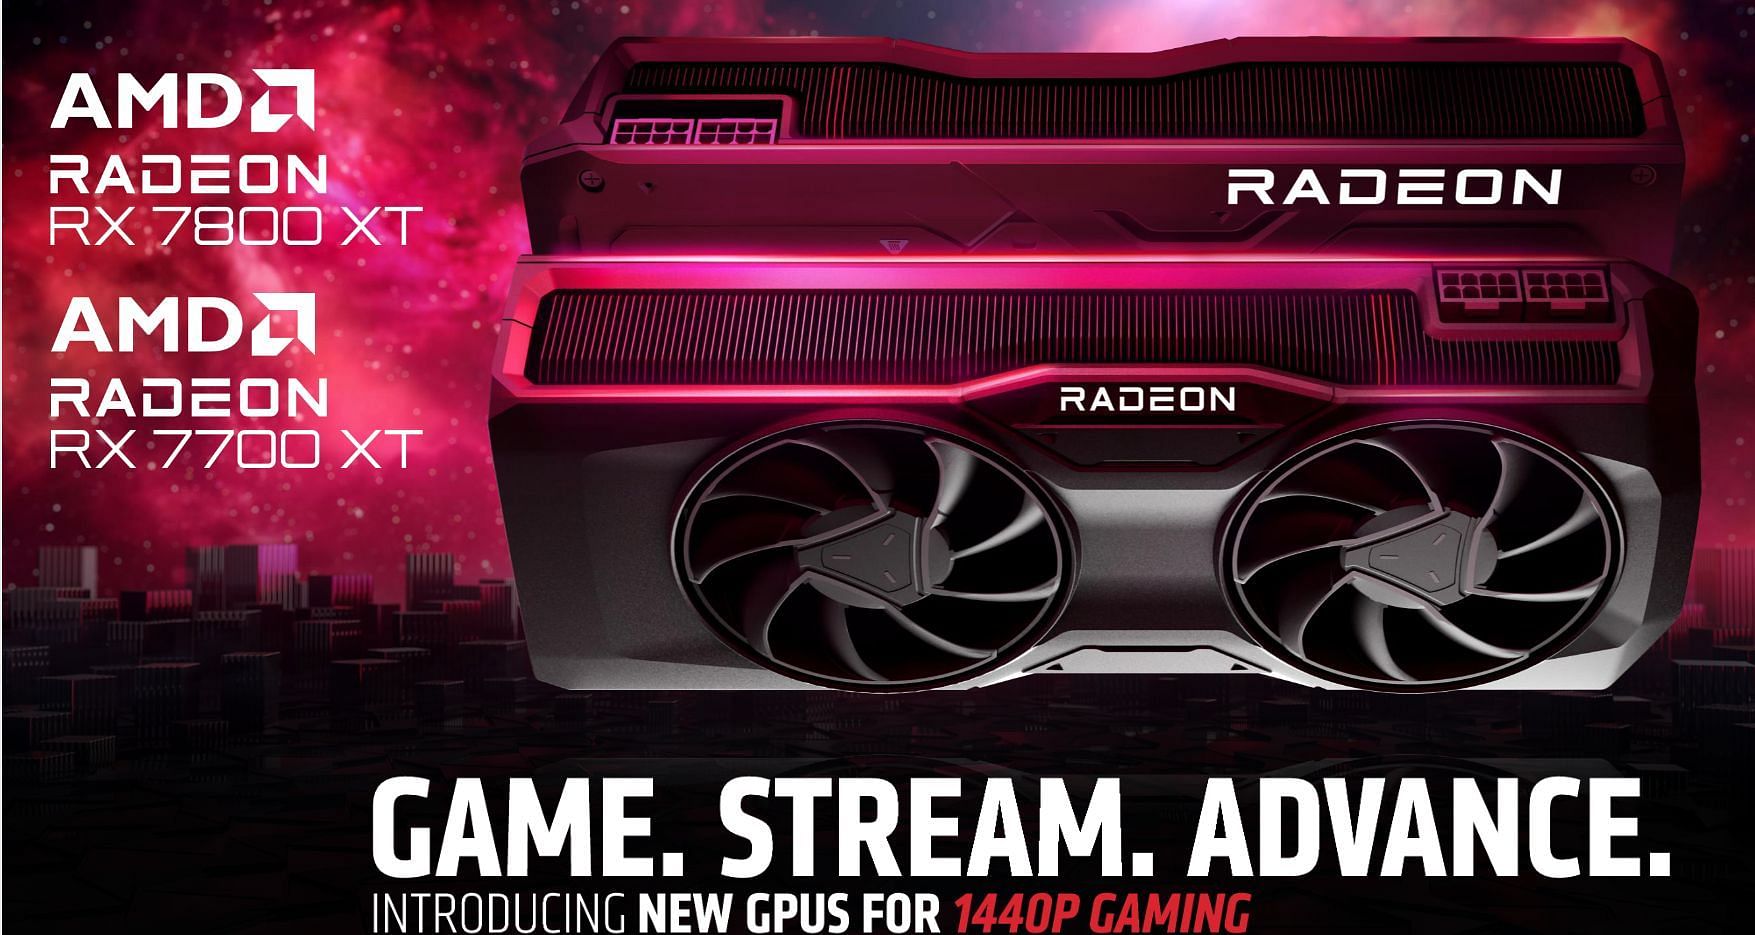 AMD Radeon RX 7800 XT: Specs, prices, performance, and more (Image via AMD)